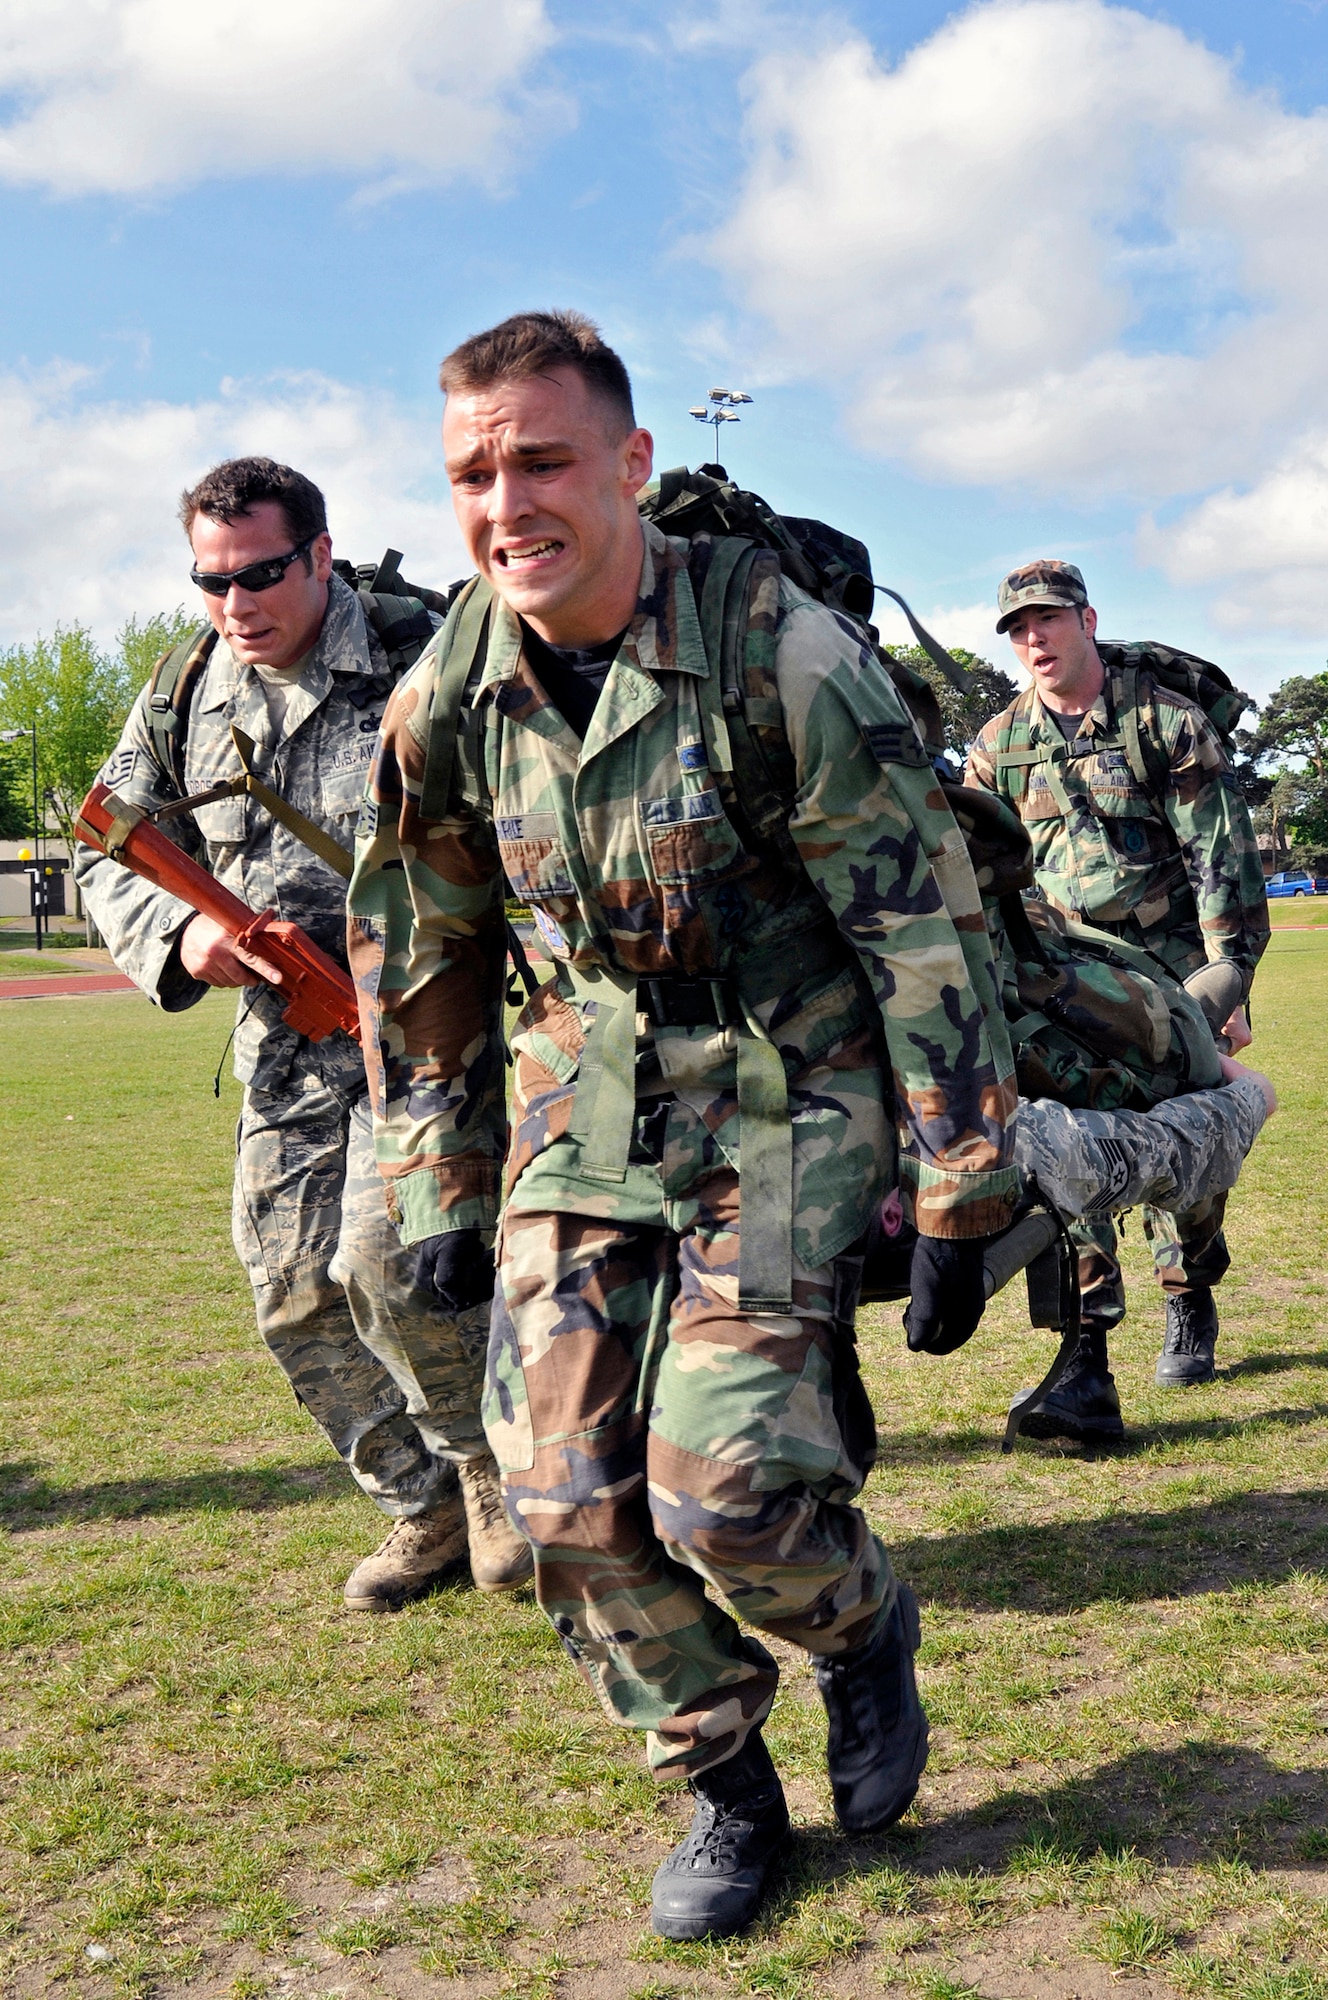 ROYAL AIR FORCE LAKENHEATH, England -- 100th Security Forces Squadron Airmen perform the litter carry during the 5K Ruck march May 11, 2009. The litter carry was the last of the tasks during the 5K Ruck march for National Police Week May 11 to 15.  (U.S. Air Force photo by Airman 1st Class Perry Aston) 